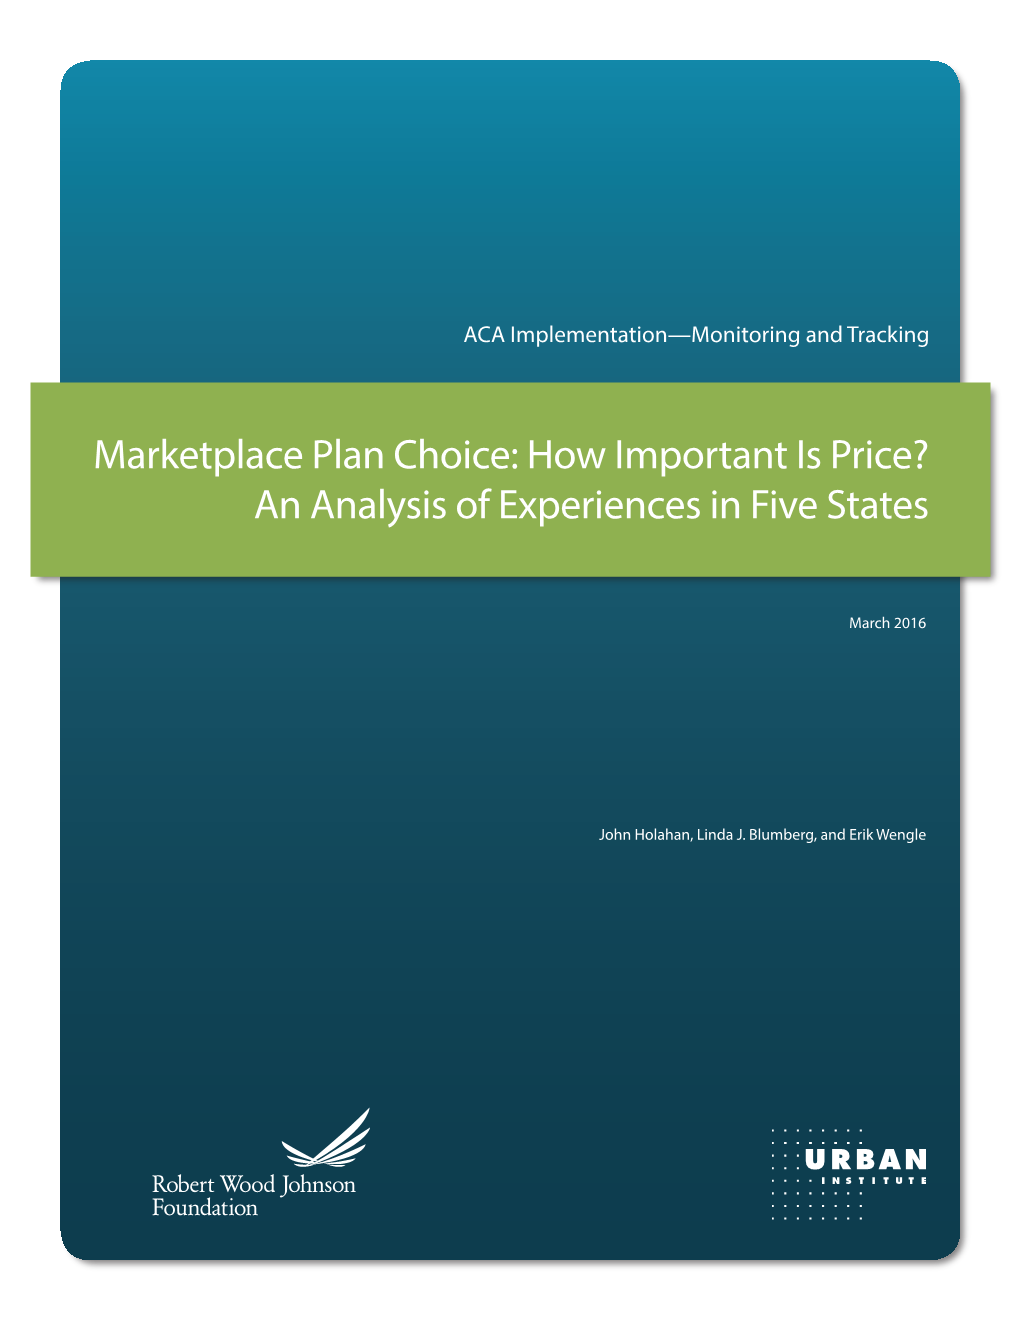 Marketplace Plan Choice: How Important Is Price? an Analysis of Experiences in Five States